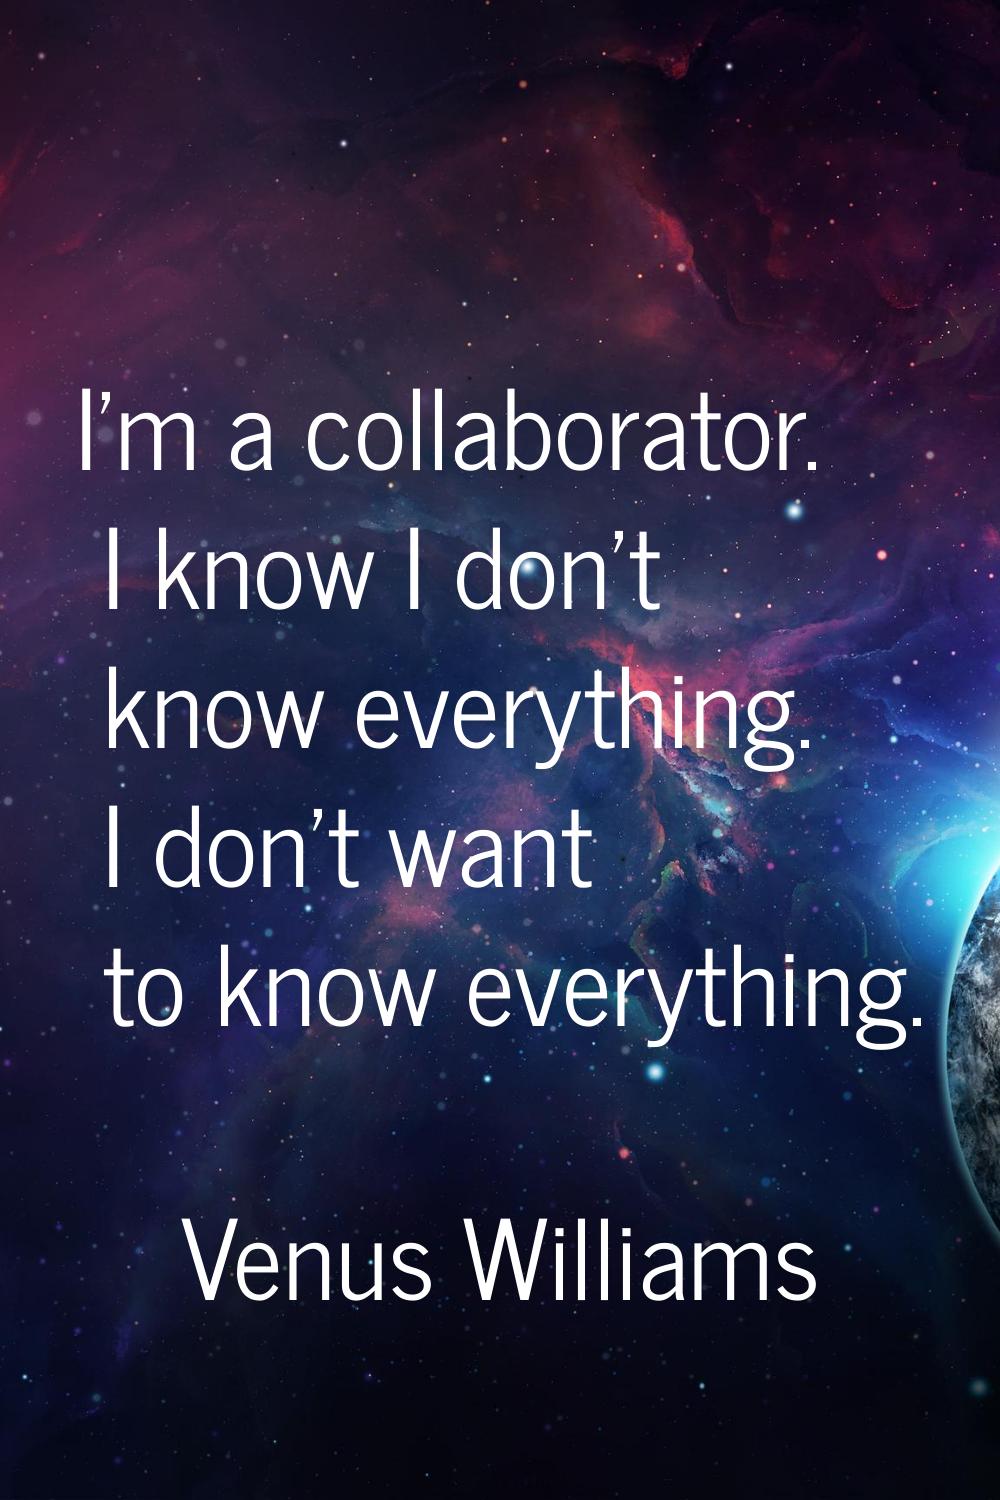 I'm a collaborator. I know I don't know everything. I don't want to know everything.